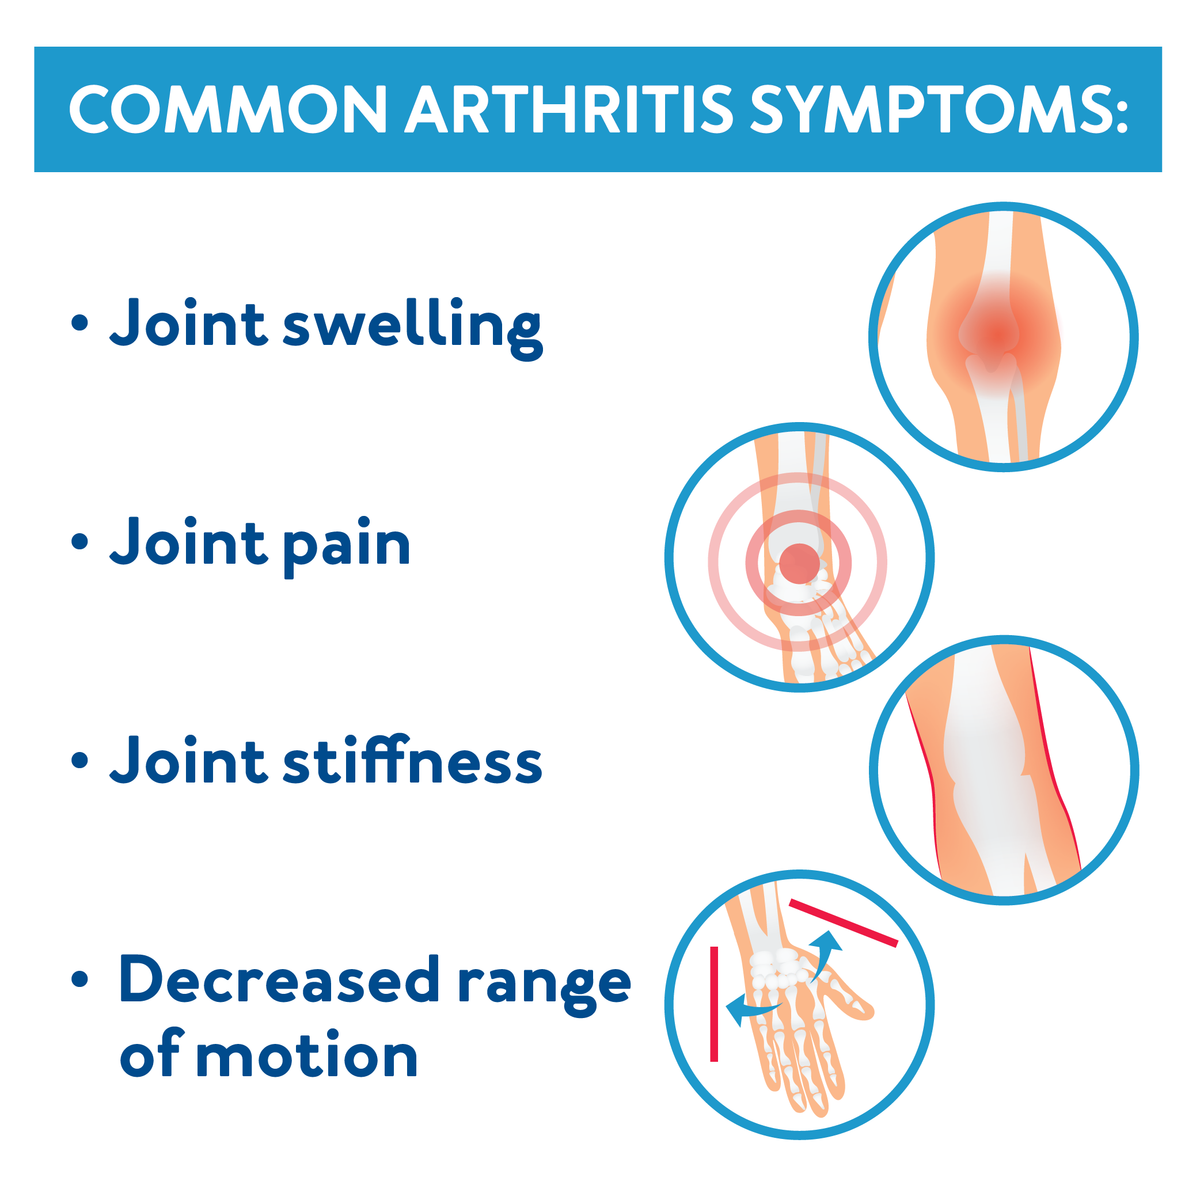 Common Arthritis Symptoms : Joint Swelling Joint Pain Joint Stiffness Decreased range of motion